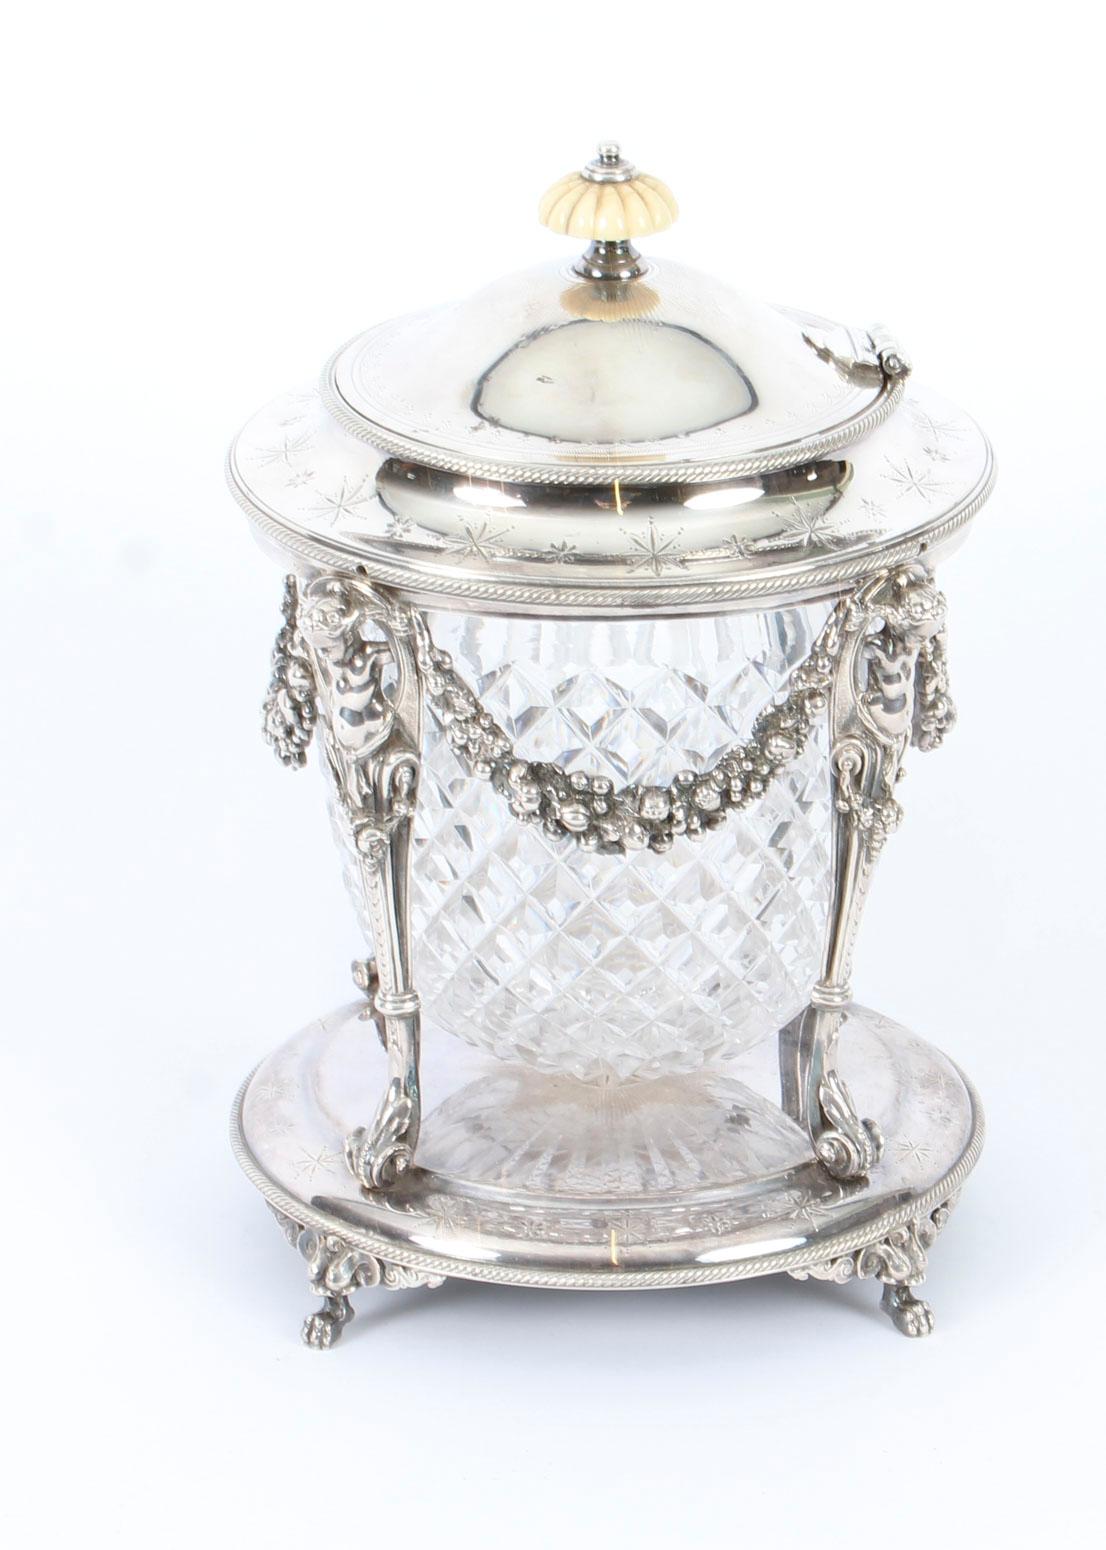 This is a superb antique Victorian silver plated and cut glass biscuit barrel, circa 1870 in date.

The biscut barrel bears the maker's mark of the renowned silversmith and retailer, Elkington & Co. 
 
This delightful piece features a diamond